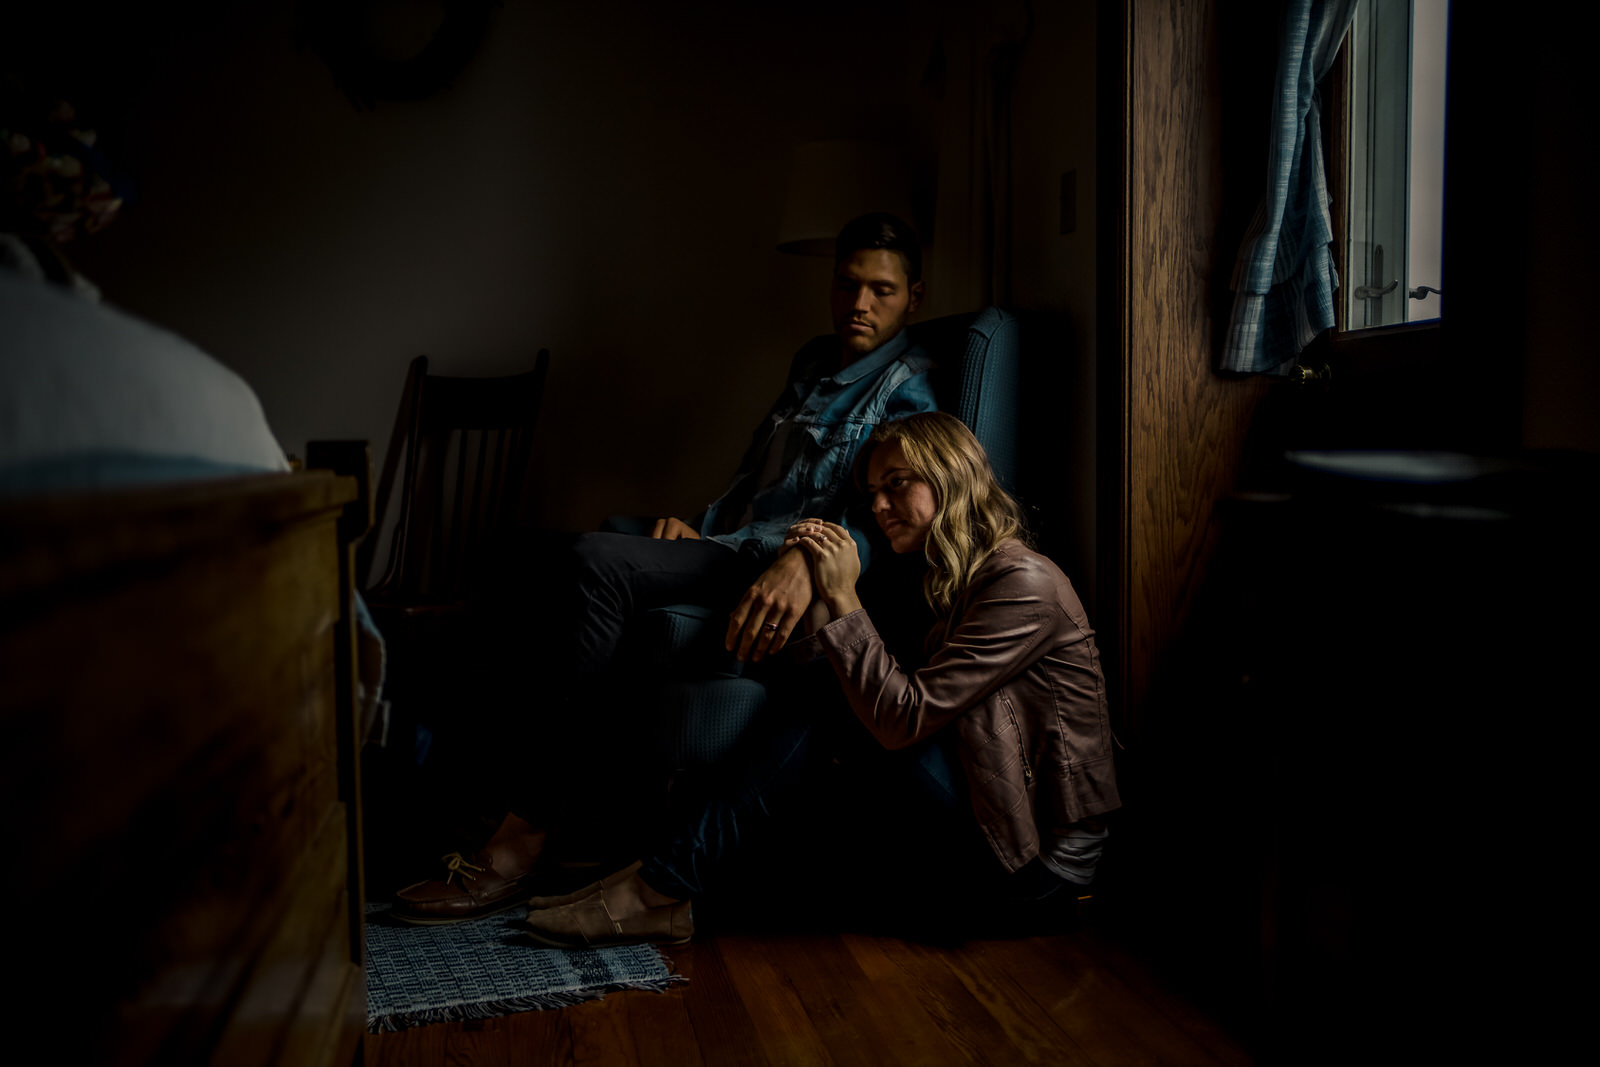 A man and woman sitting in a dark room.